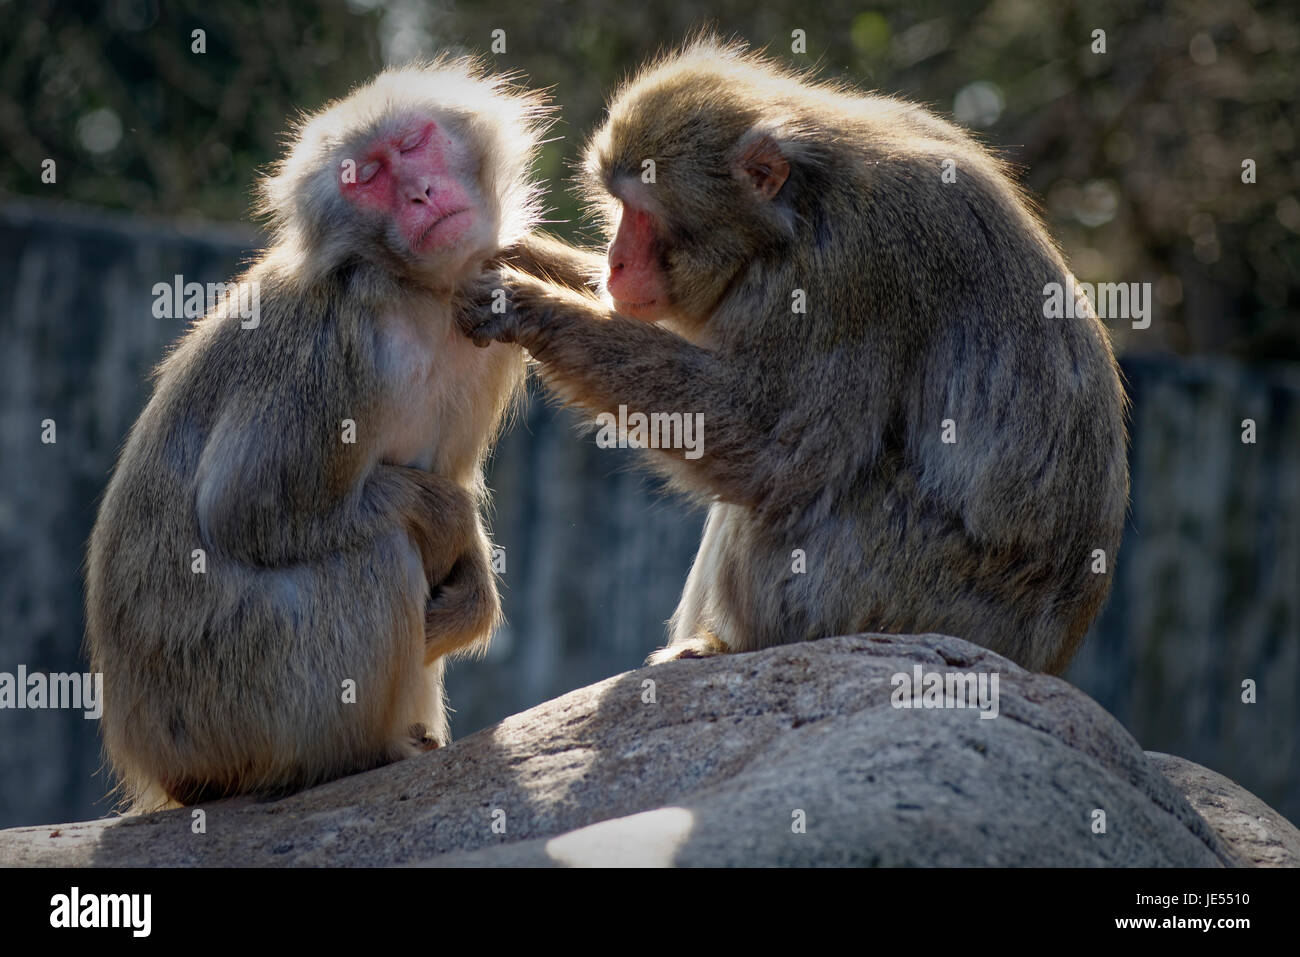 Japanese macaque (Macaca fuscata) are maintaining their social relationships within the group by grooming each other. Stock Photo